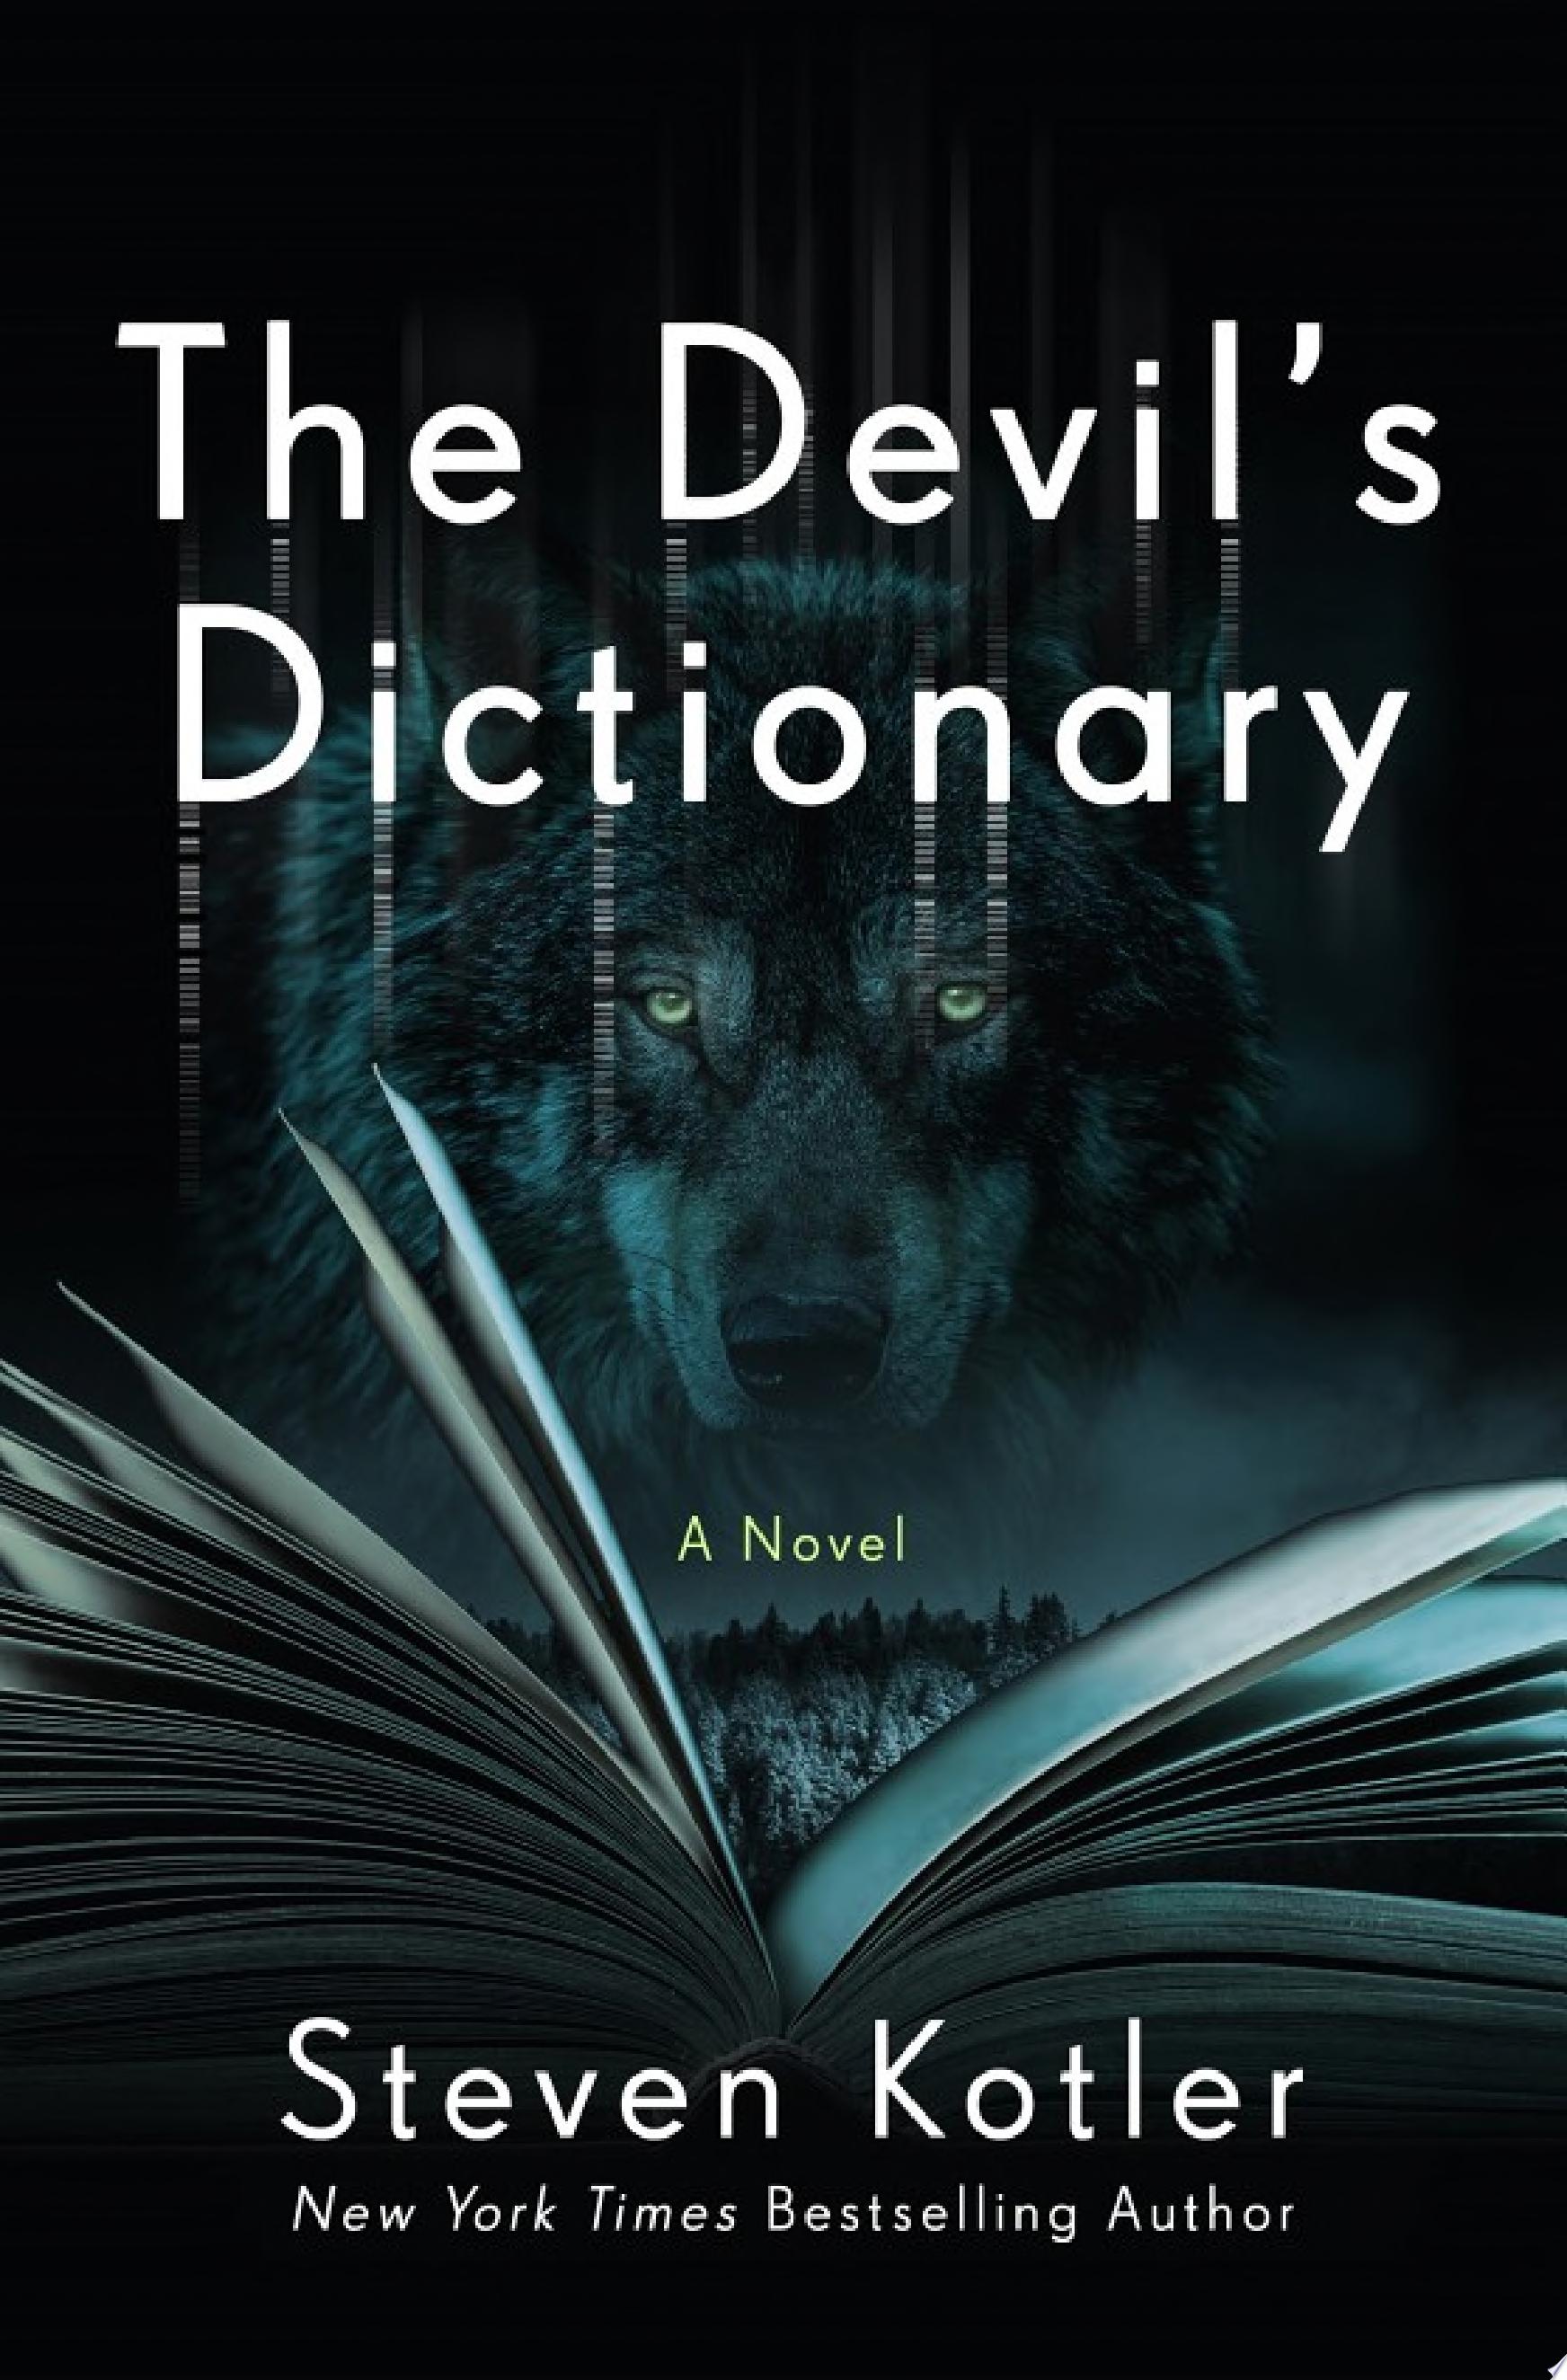 Image for "The Devil's Dictionary"